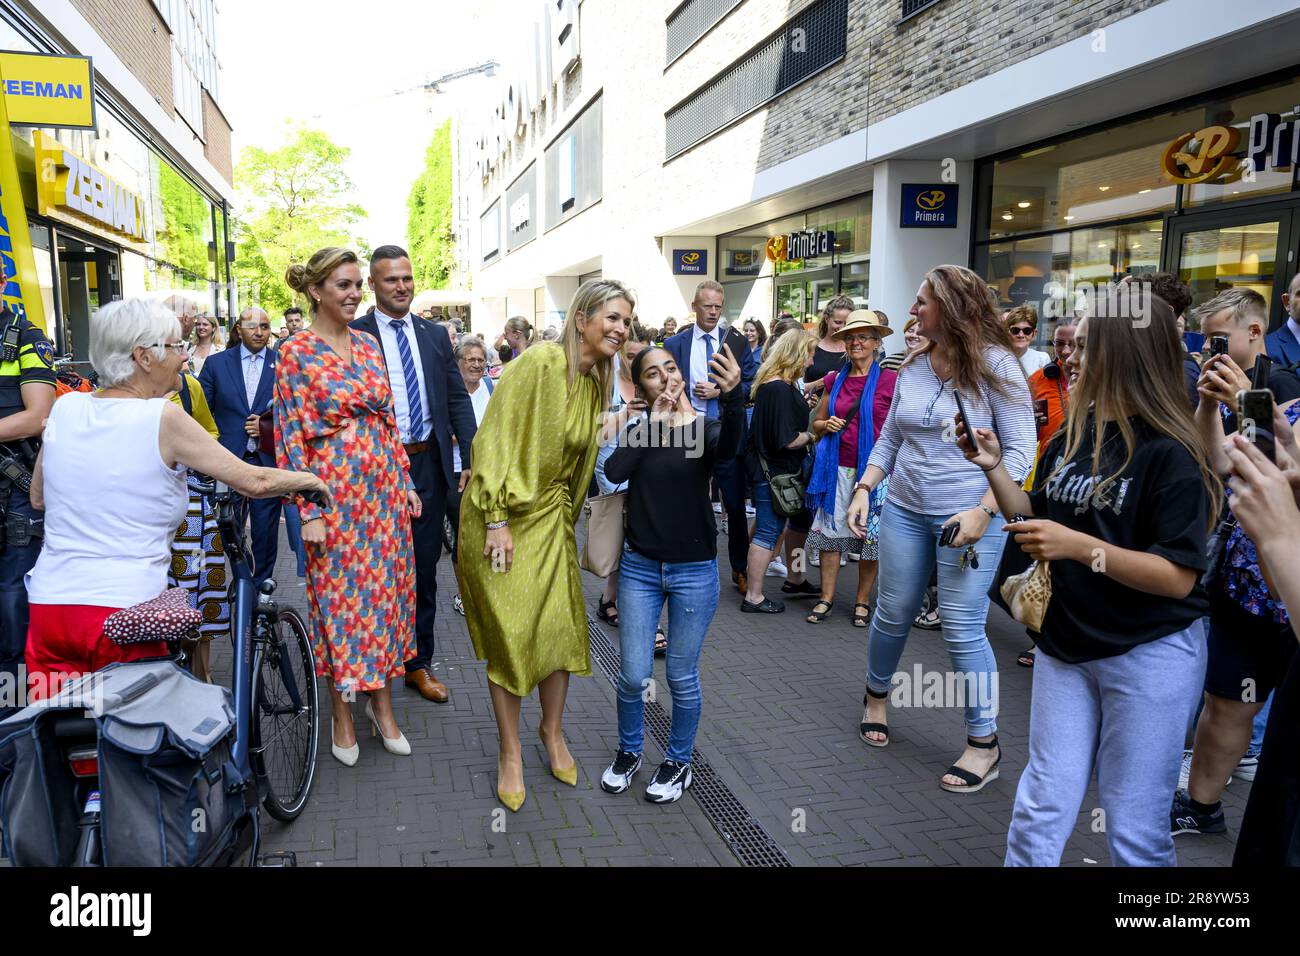 ALPHEN AAN DEN RIJN - Queen Maxima (M) takes a picture with passers-by  during a visit together with State Secretary Vivianne Heijnen  (Infrastructure and Water Management) to a store of the Zeeman